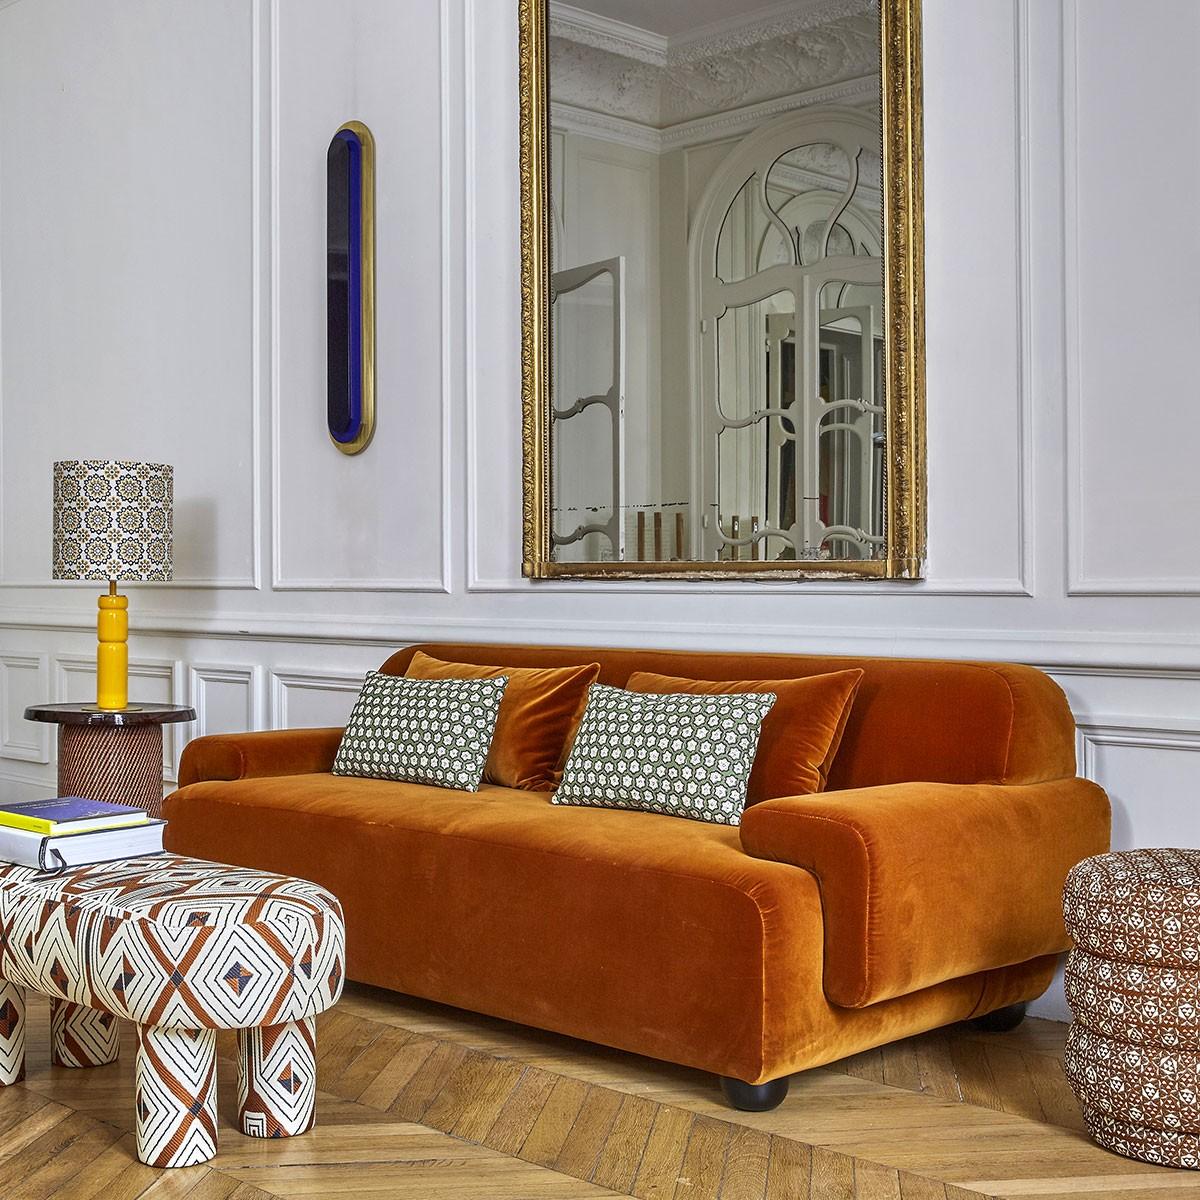 Popus Editions Lena 3 seater sofa in bordeaux como velvet upholstery

It looks like it's straight out of a movie, with its generous curves and wide armrests. It is a real invitation to spend long Sundays with the family, comfortably seated in